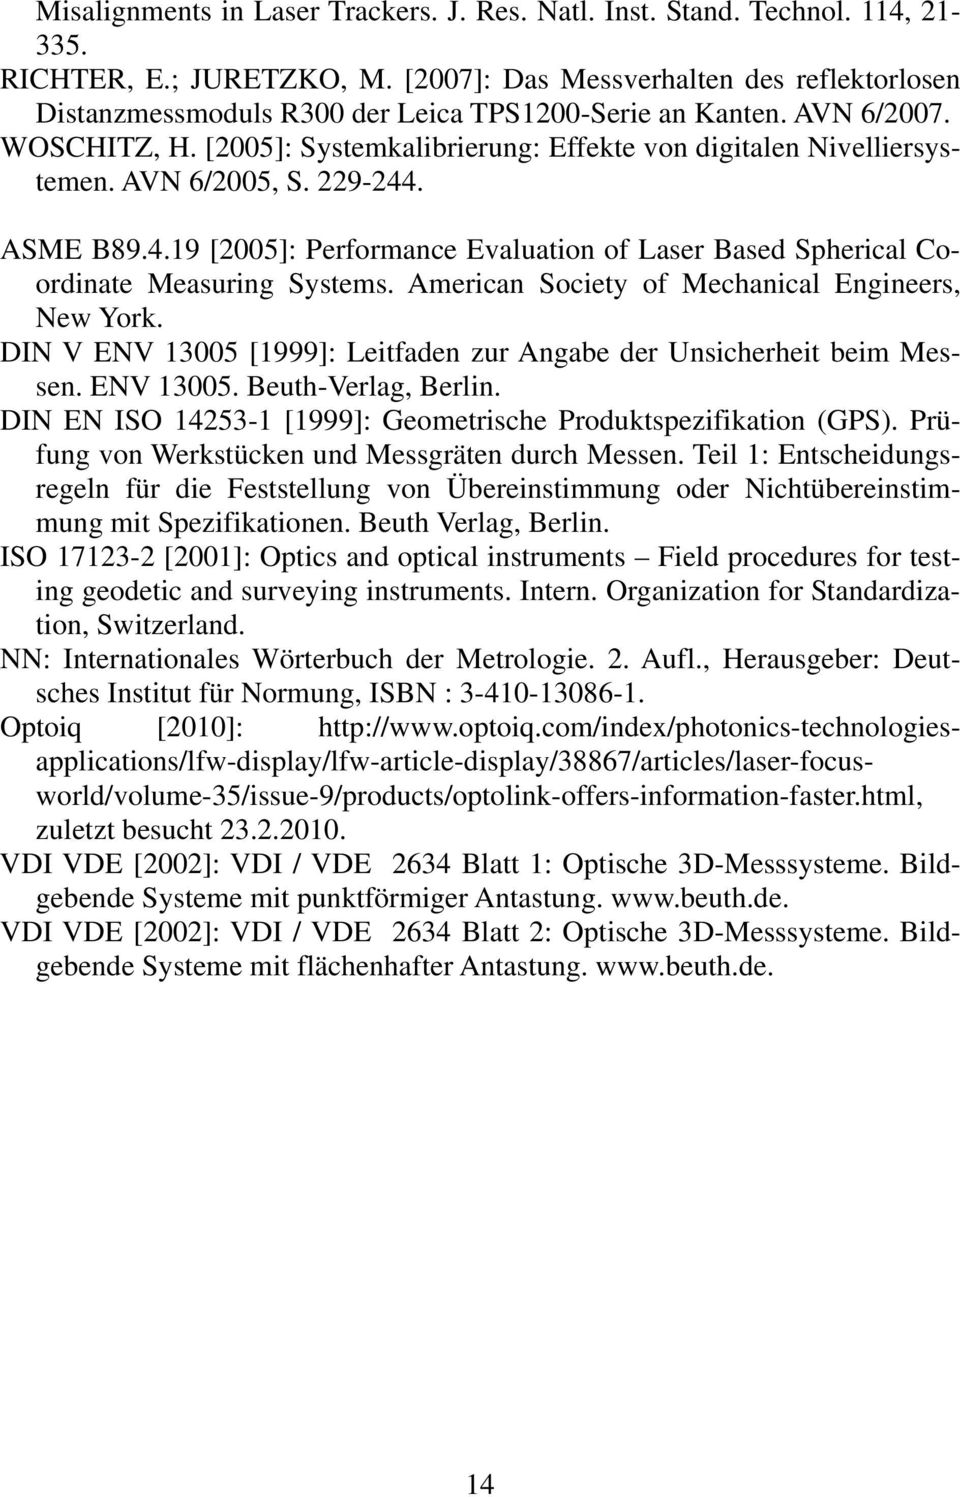 AVN 6/2005, S. 229-244. ASME B89.4.19 [2005]: Performance Evaluation of Laser Based Spherical Coordinate Measuring Systems. American Society of Mechanical Engineers, New York.